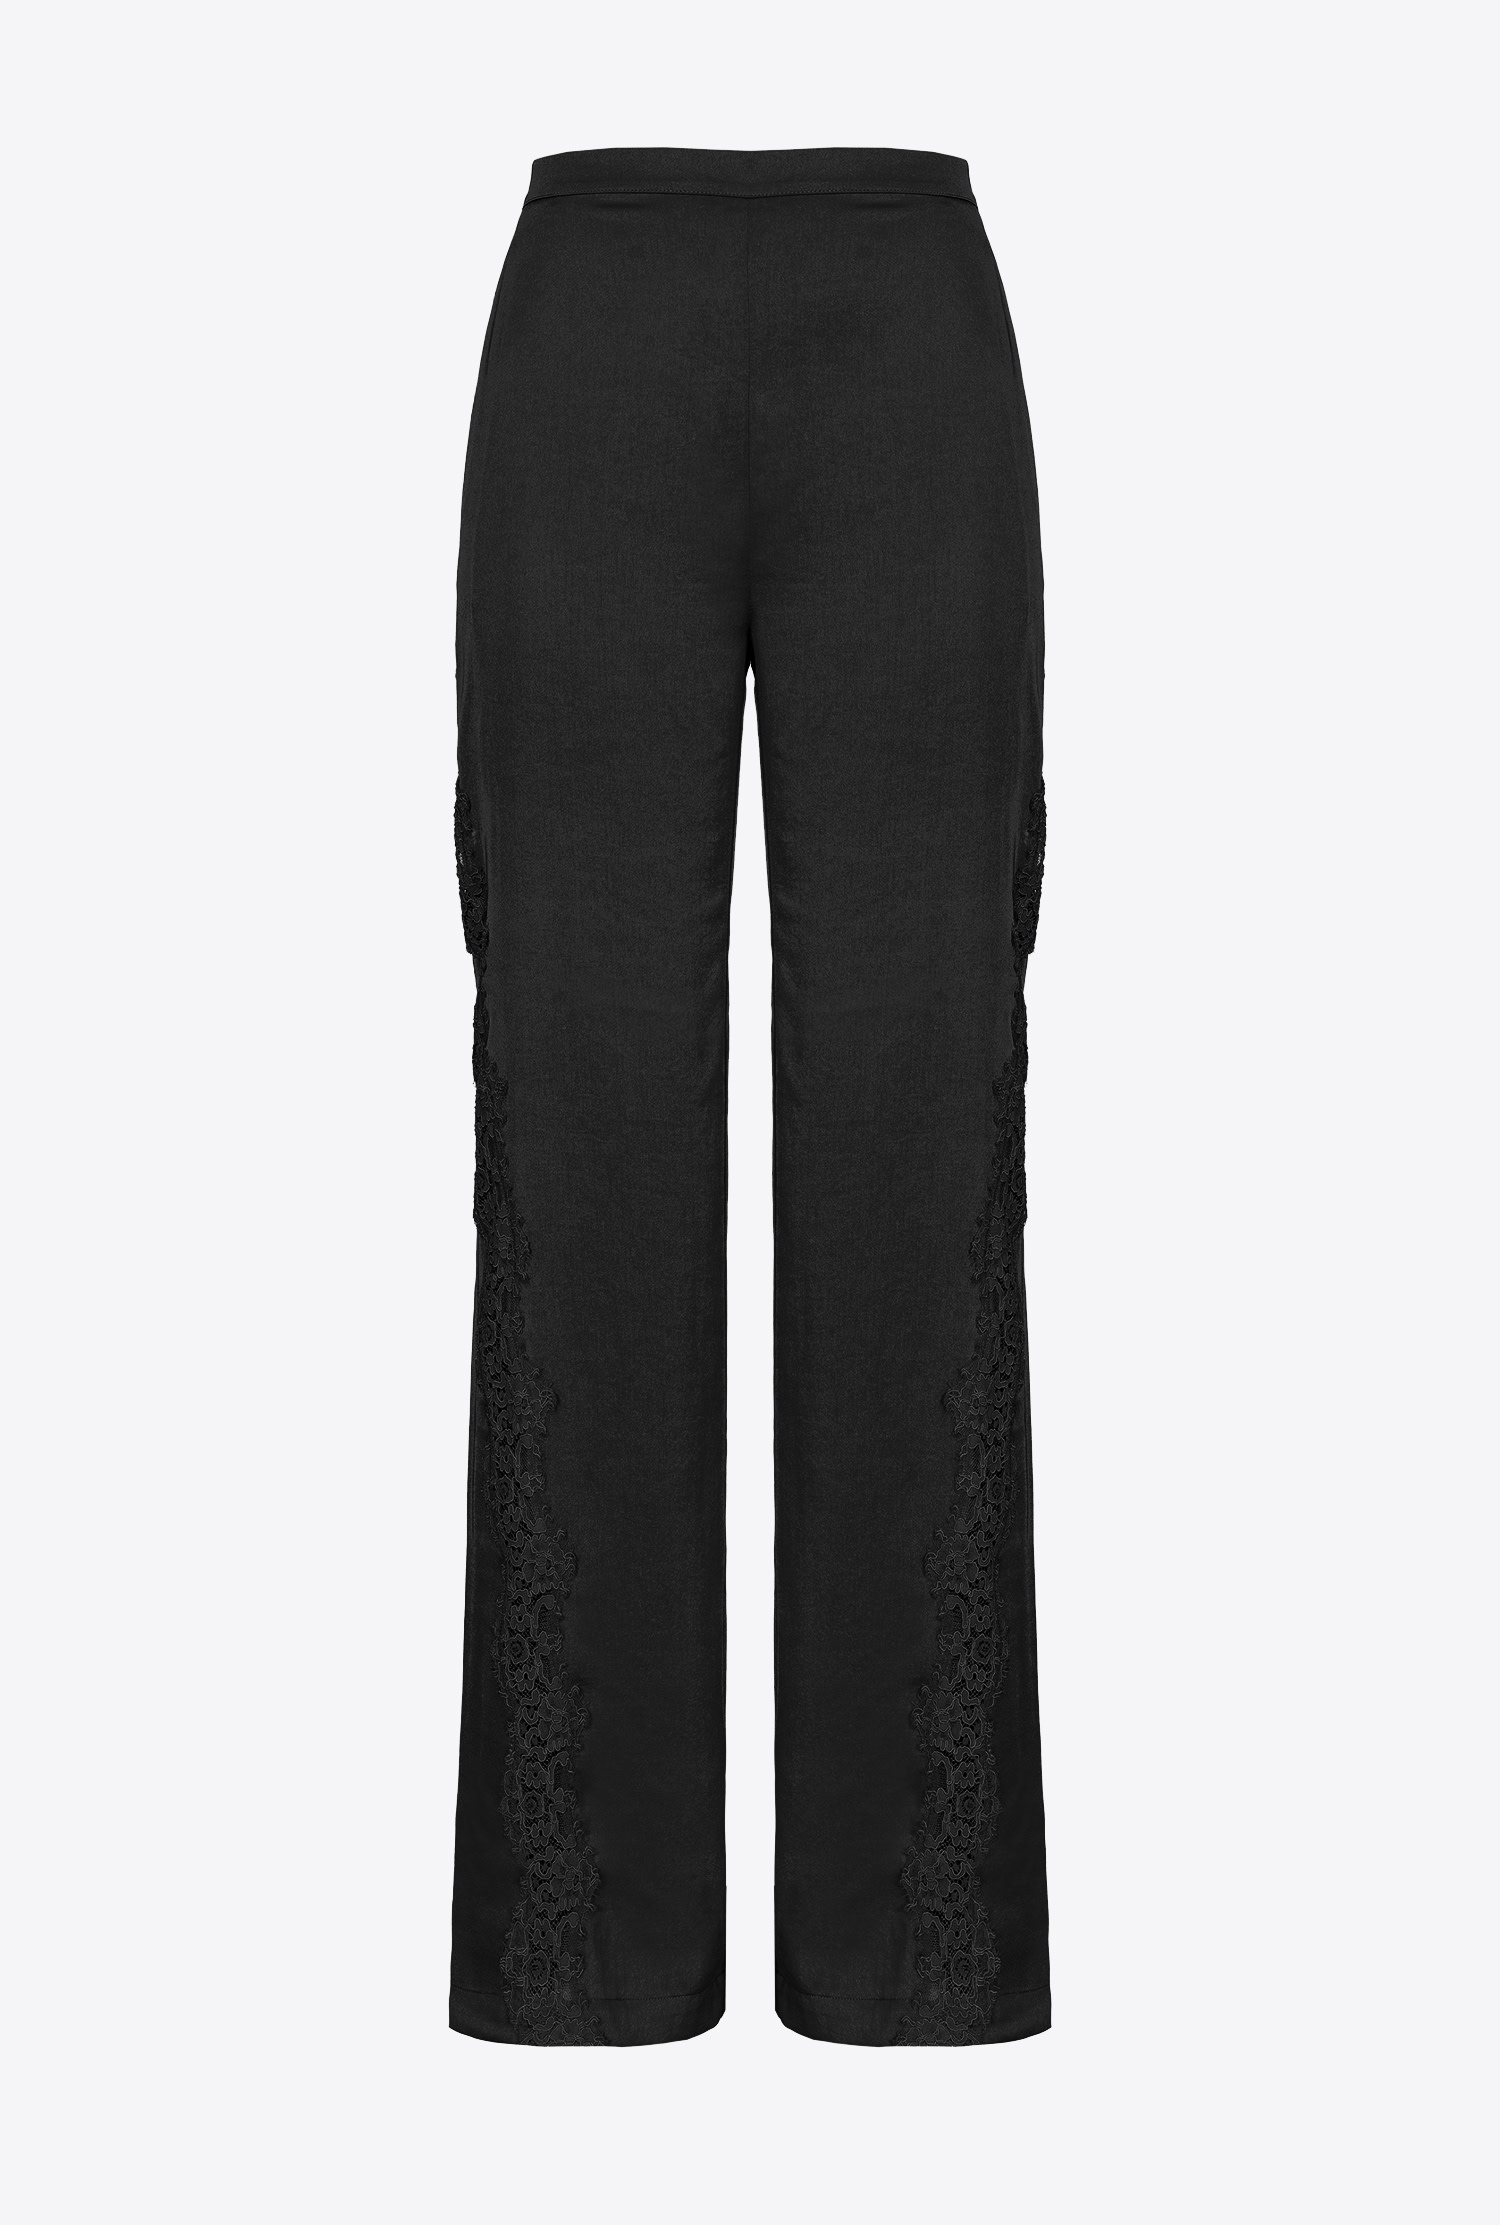 Satin and lace trousers